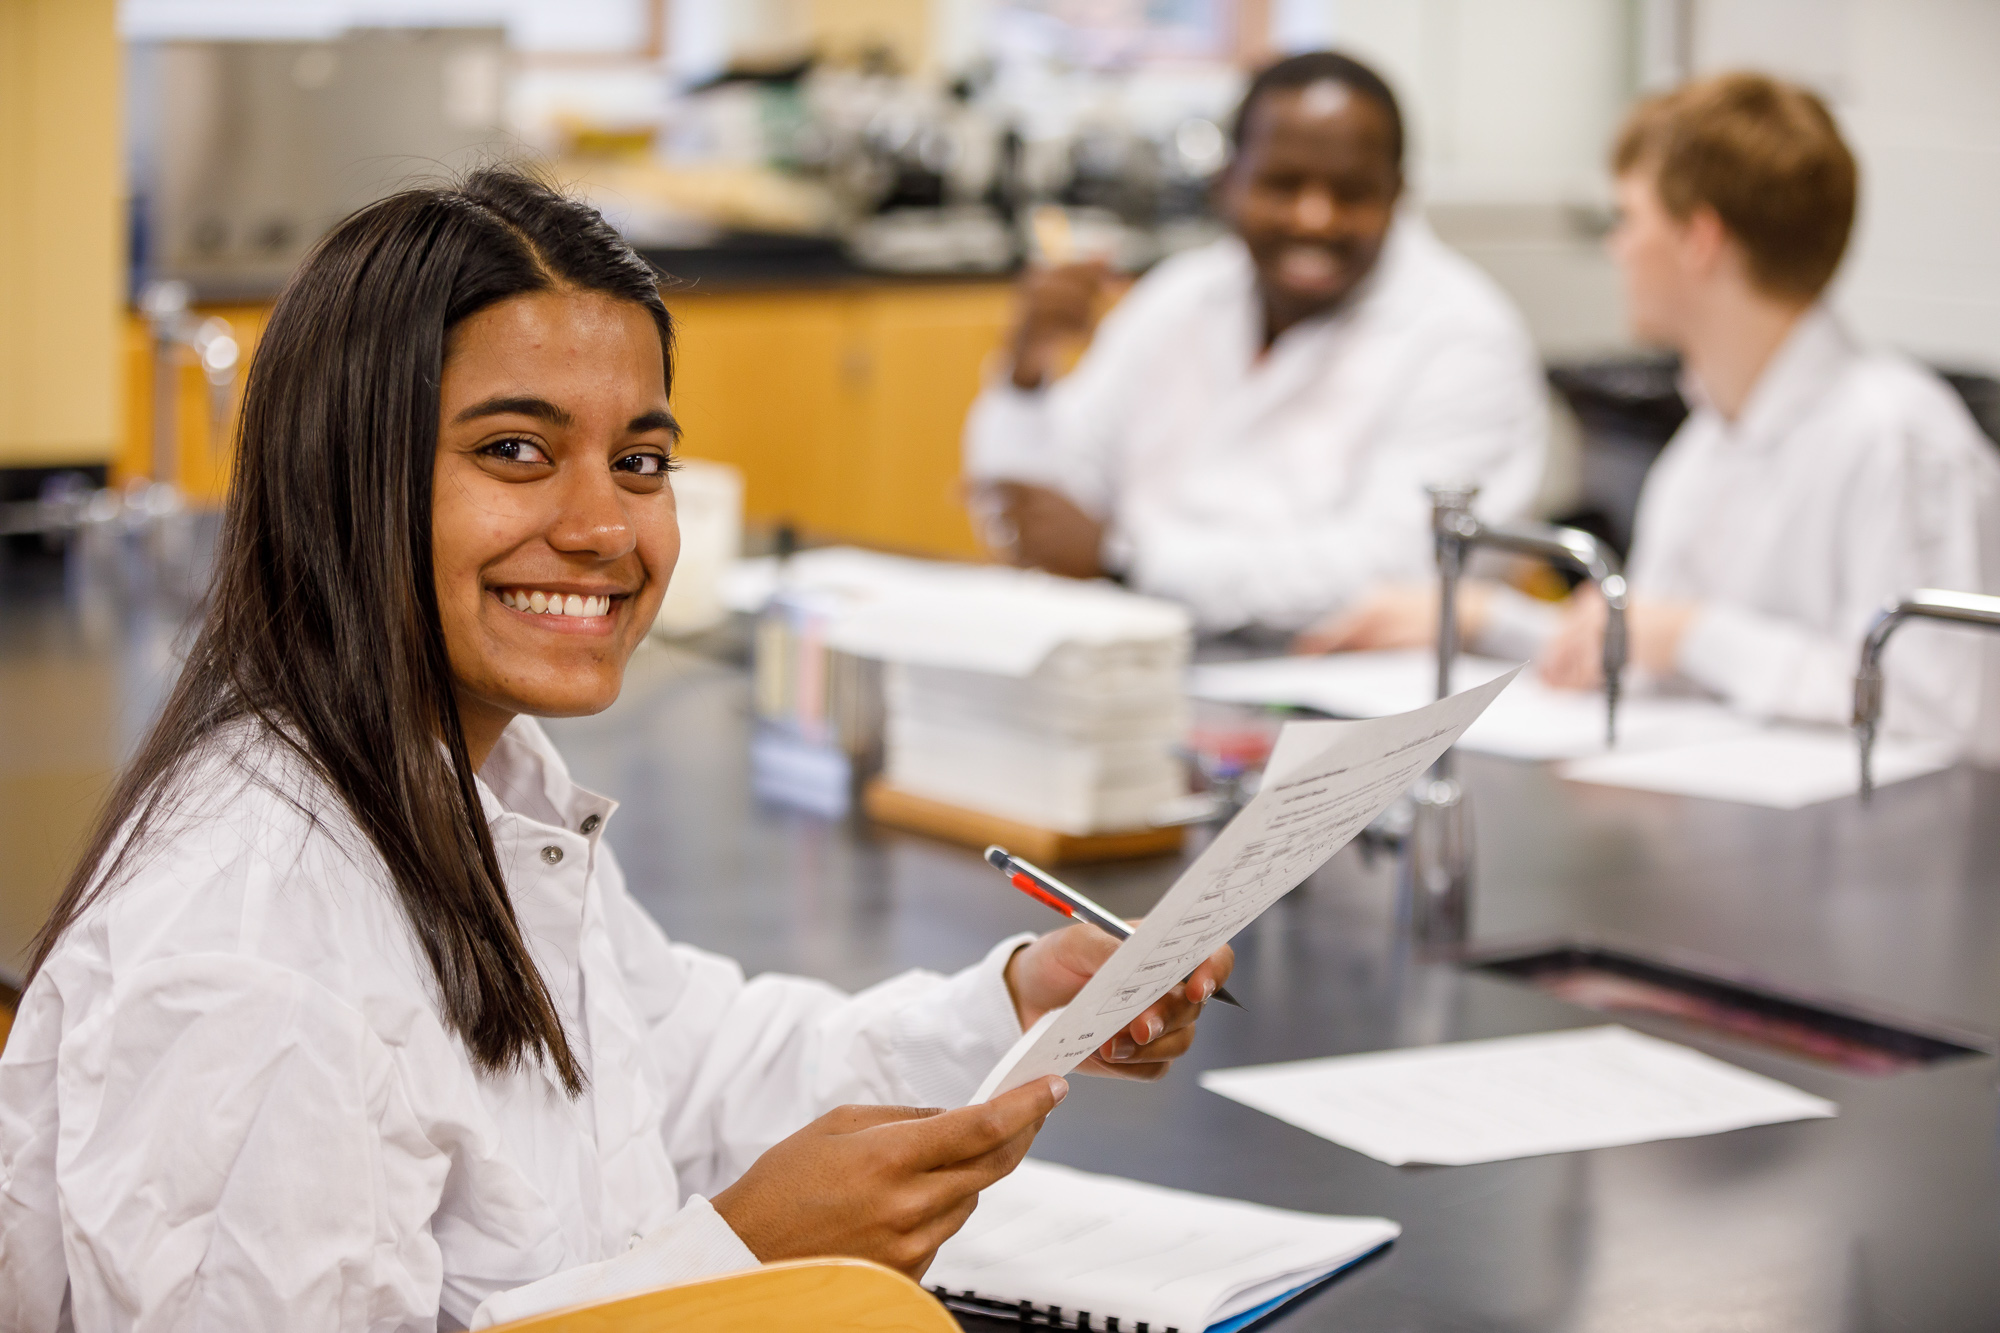 Woman in a lab coat smiling while holding a paper, two students talk behind her